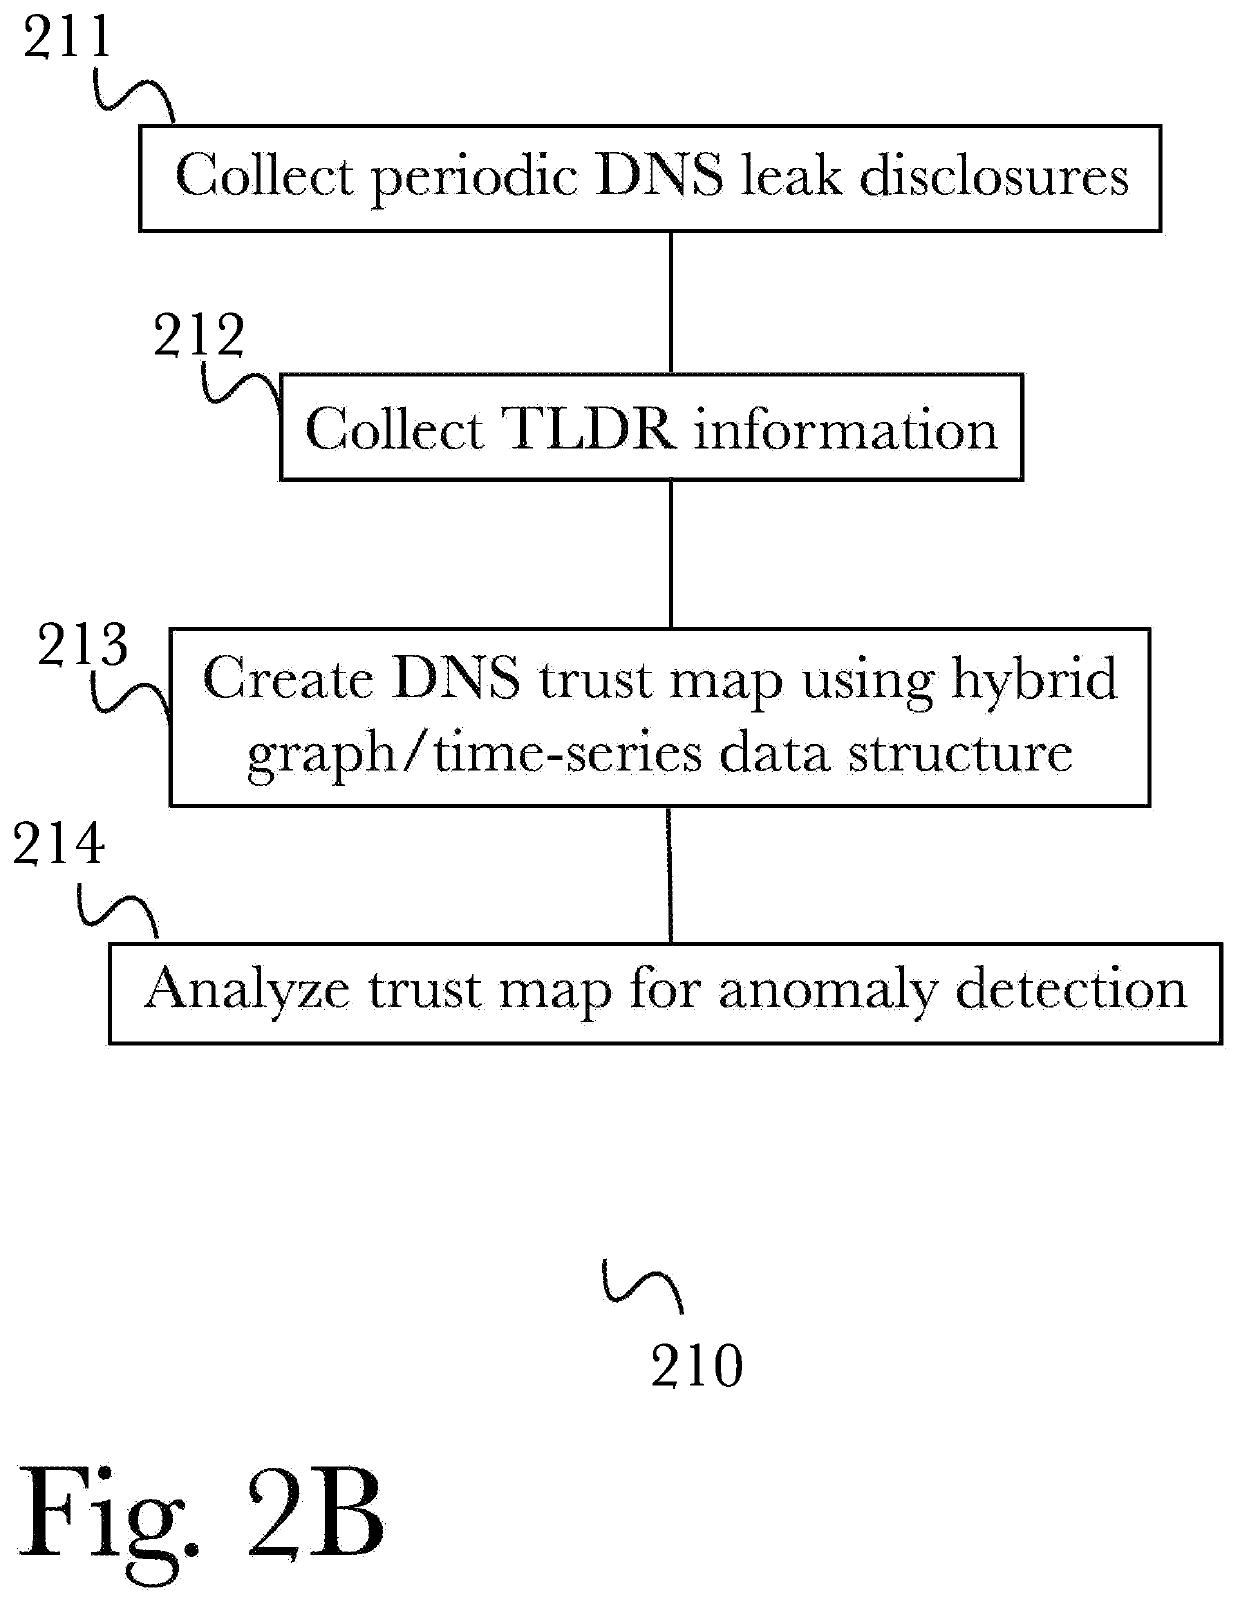 System and methods for automated internet-scale web application vulnerability scanning and enhanced security profiling